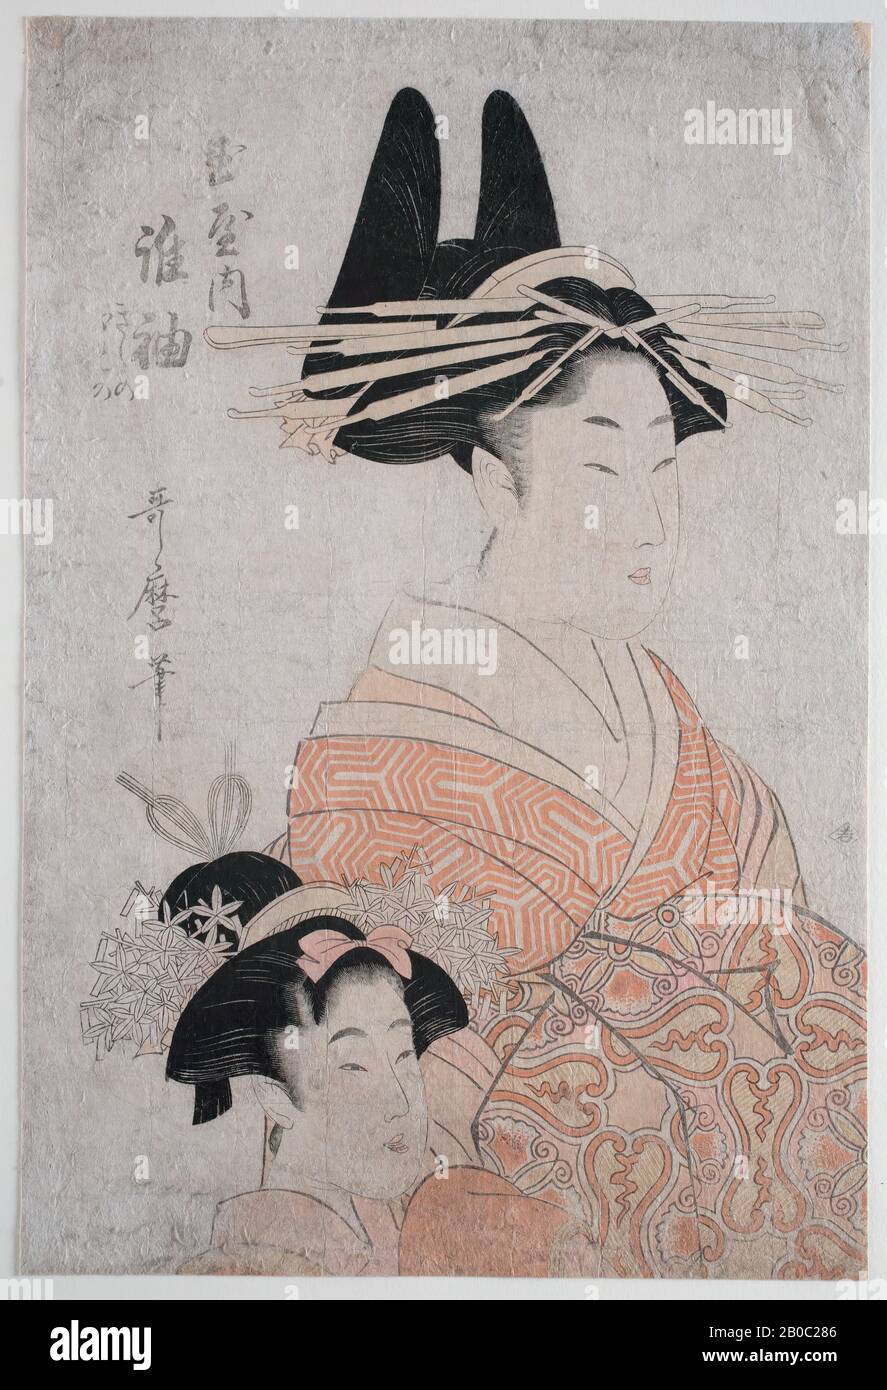 Kitagawa Utamaro, Two Courtesans (heads), 1753-1806, color woodcut on paper, 14 7/8 in. x 10 in. (37.8 cm. x 25.4 cm.) Stock Photo